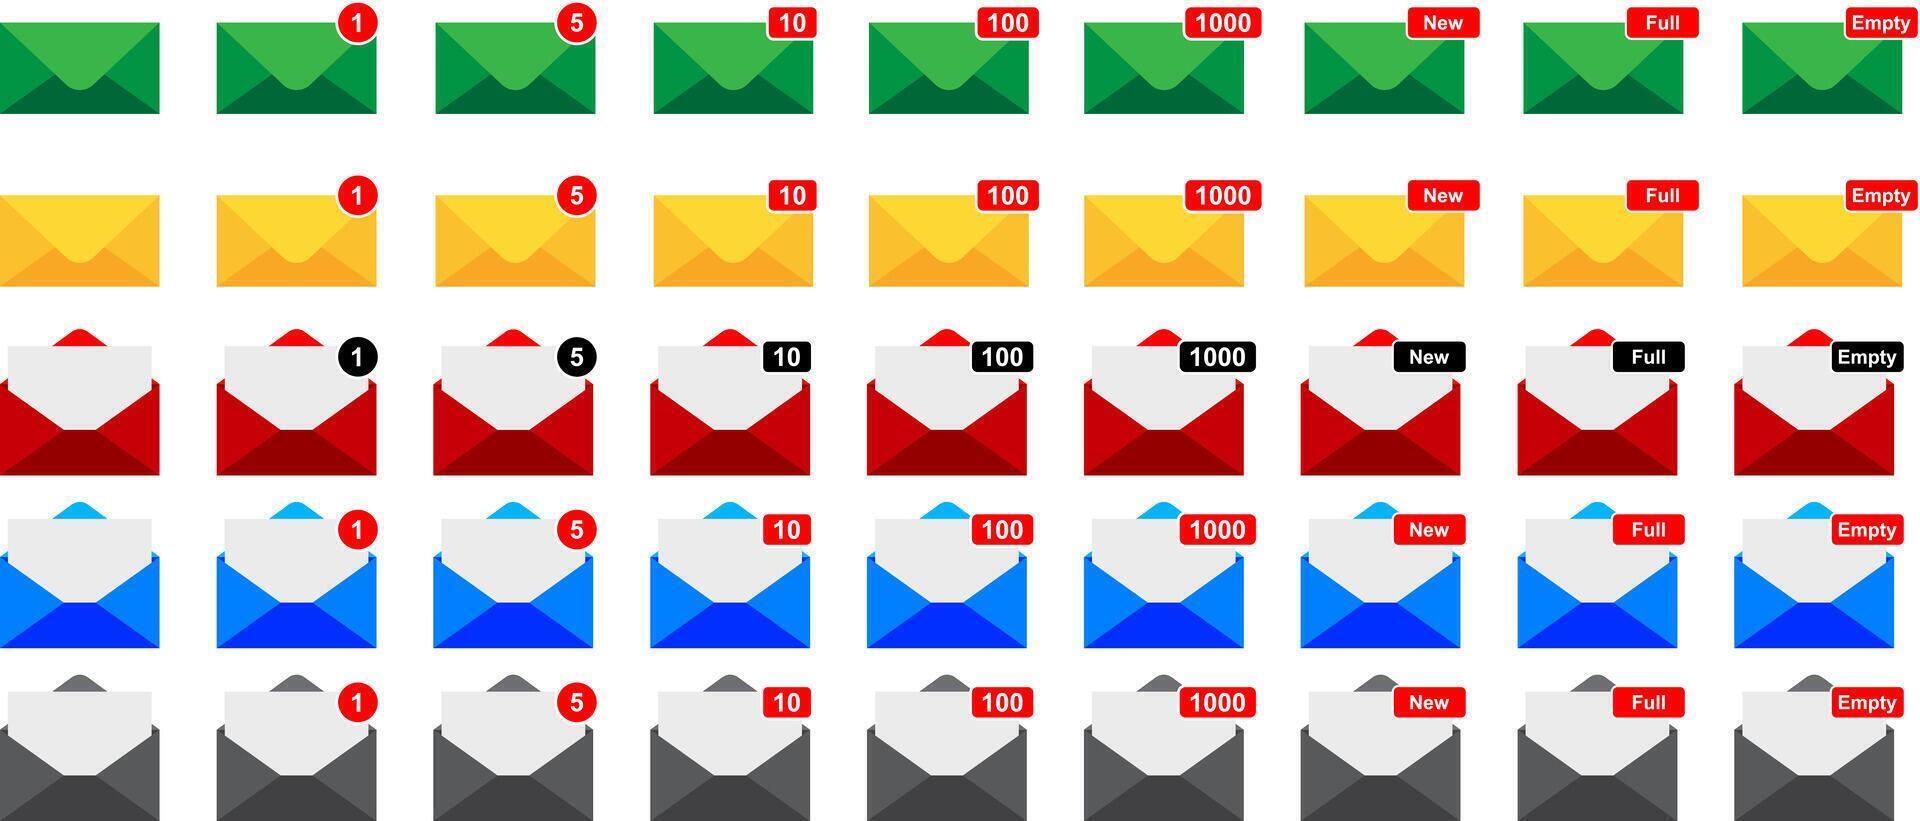 email icon collection in green, yellow, red, blue and black colors with email count notification dots vector